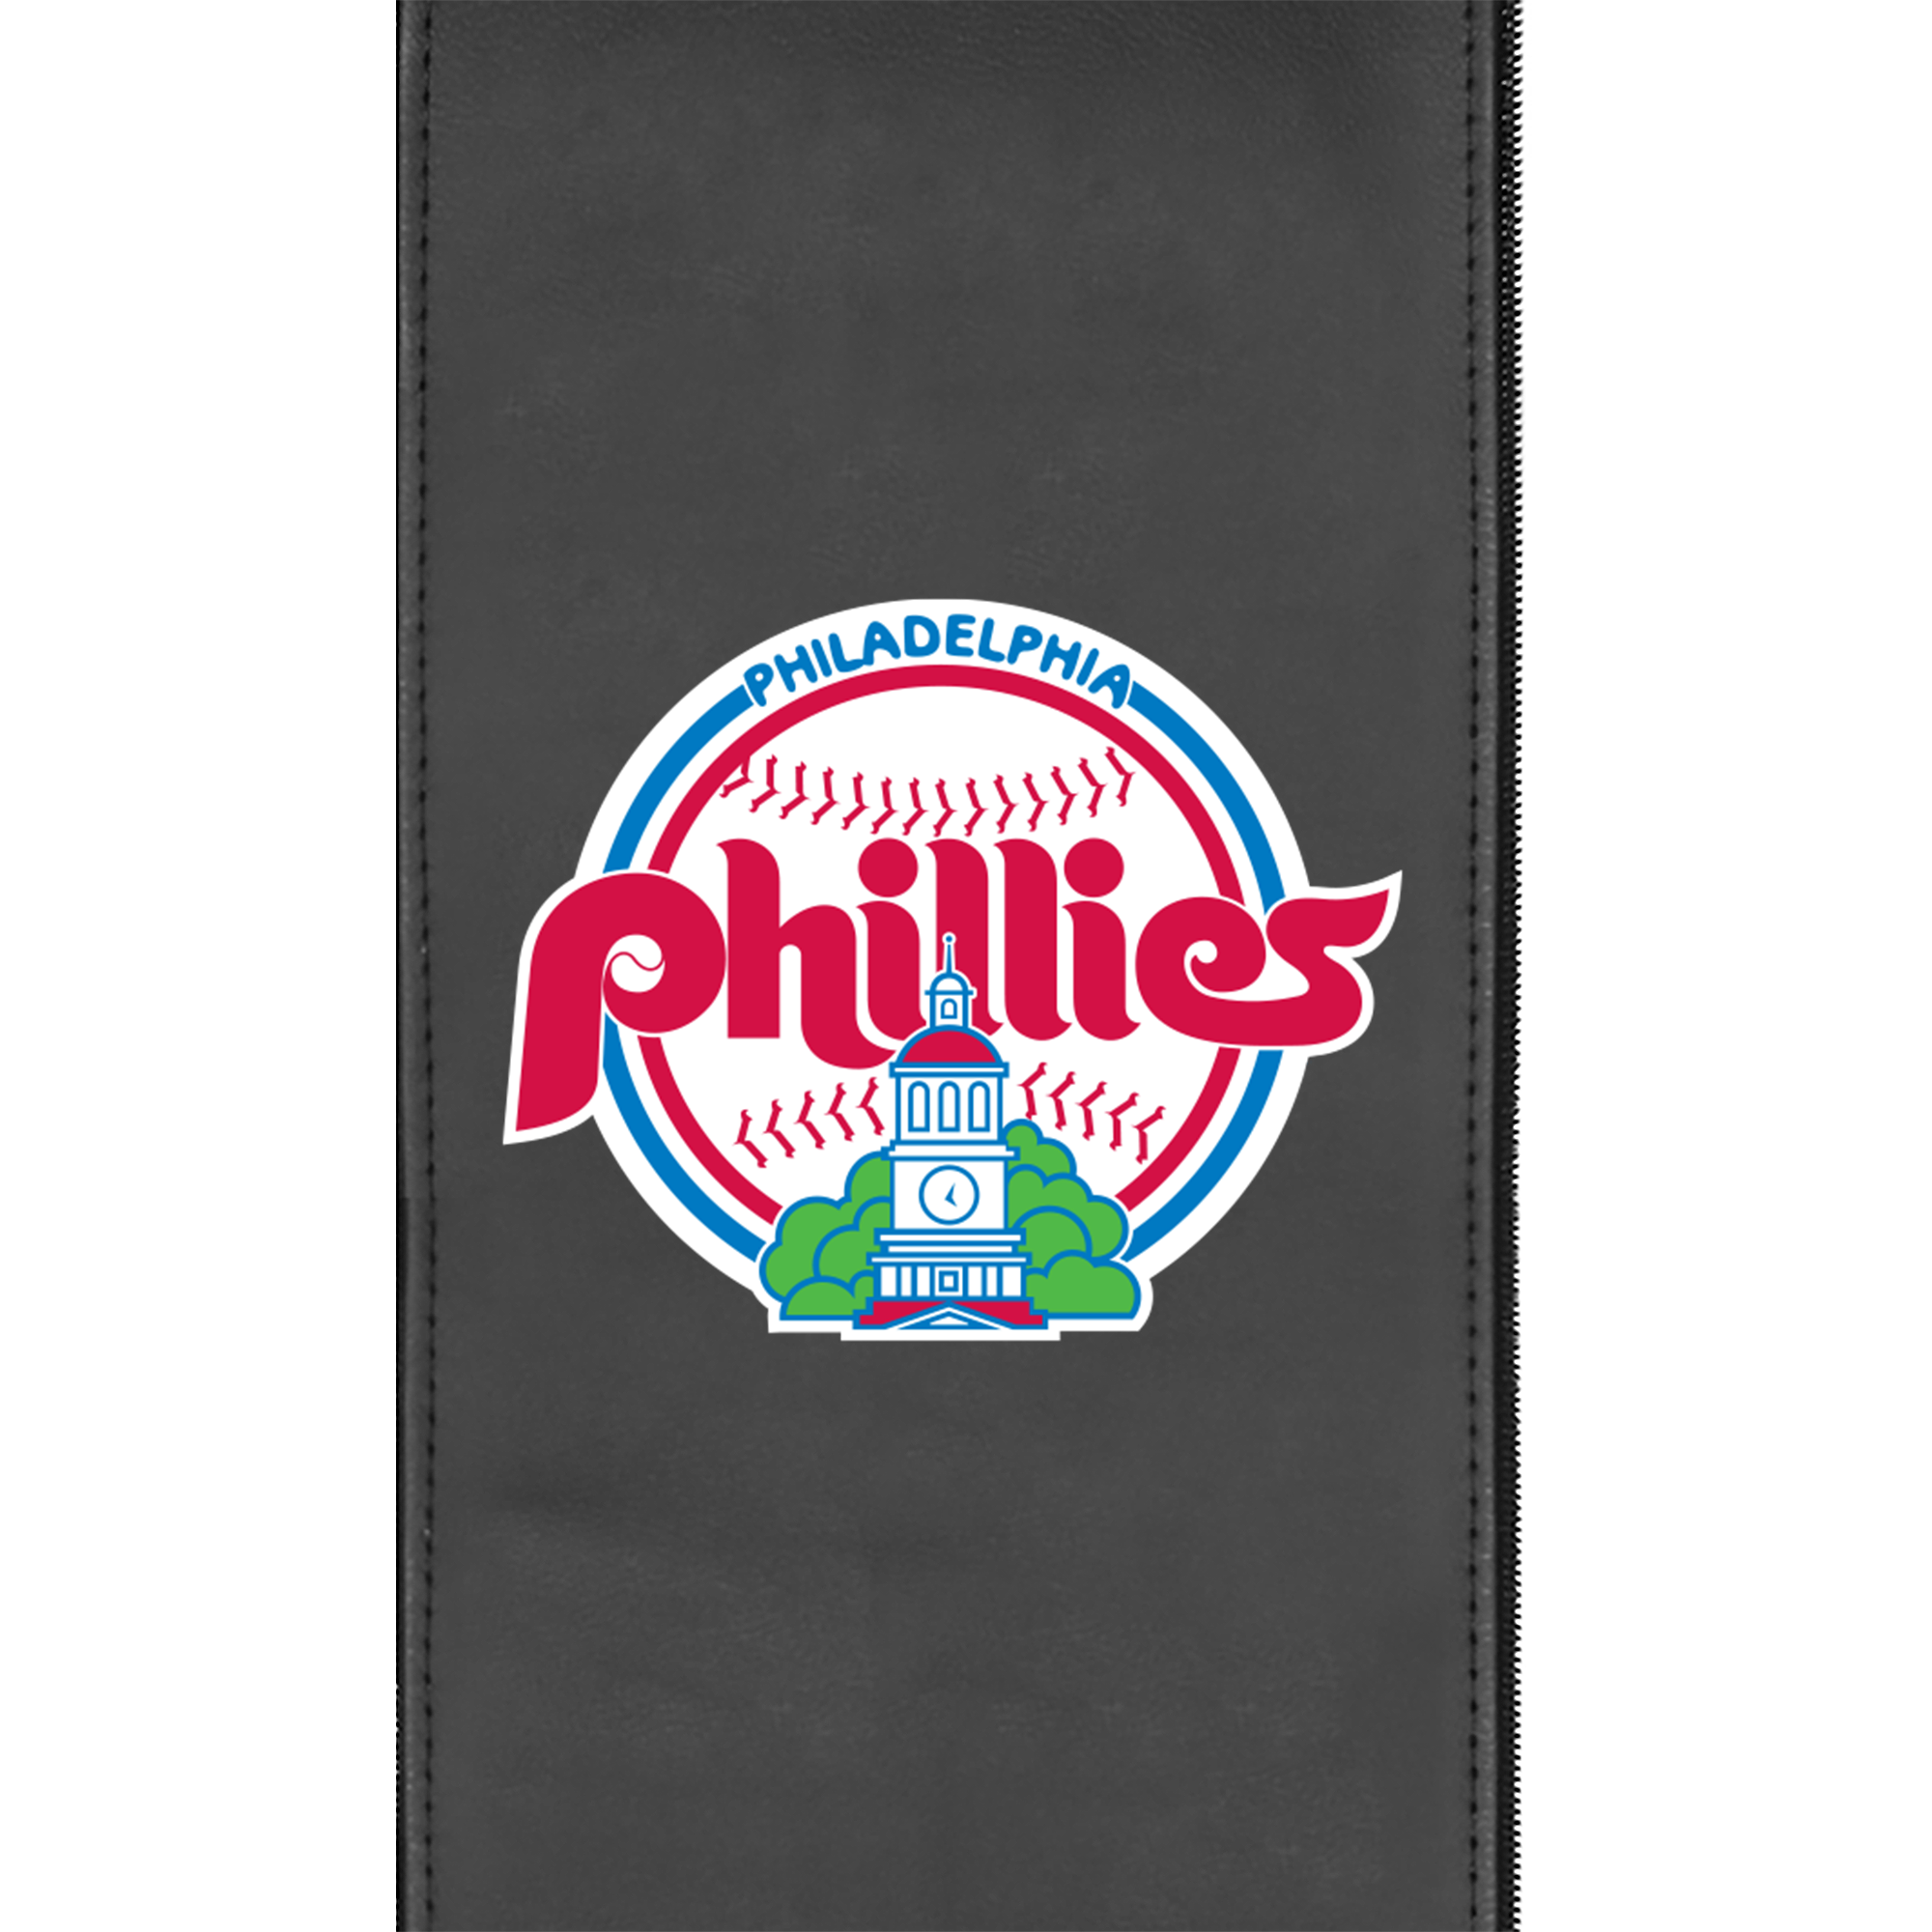 Silver Club Chair with Philadelphia Phillies Cooperstown Primary